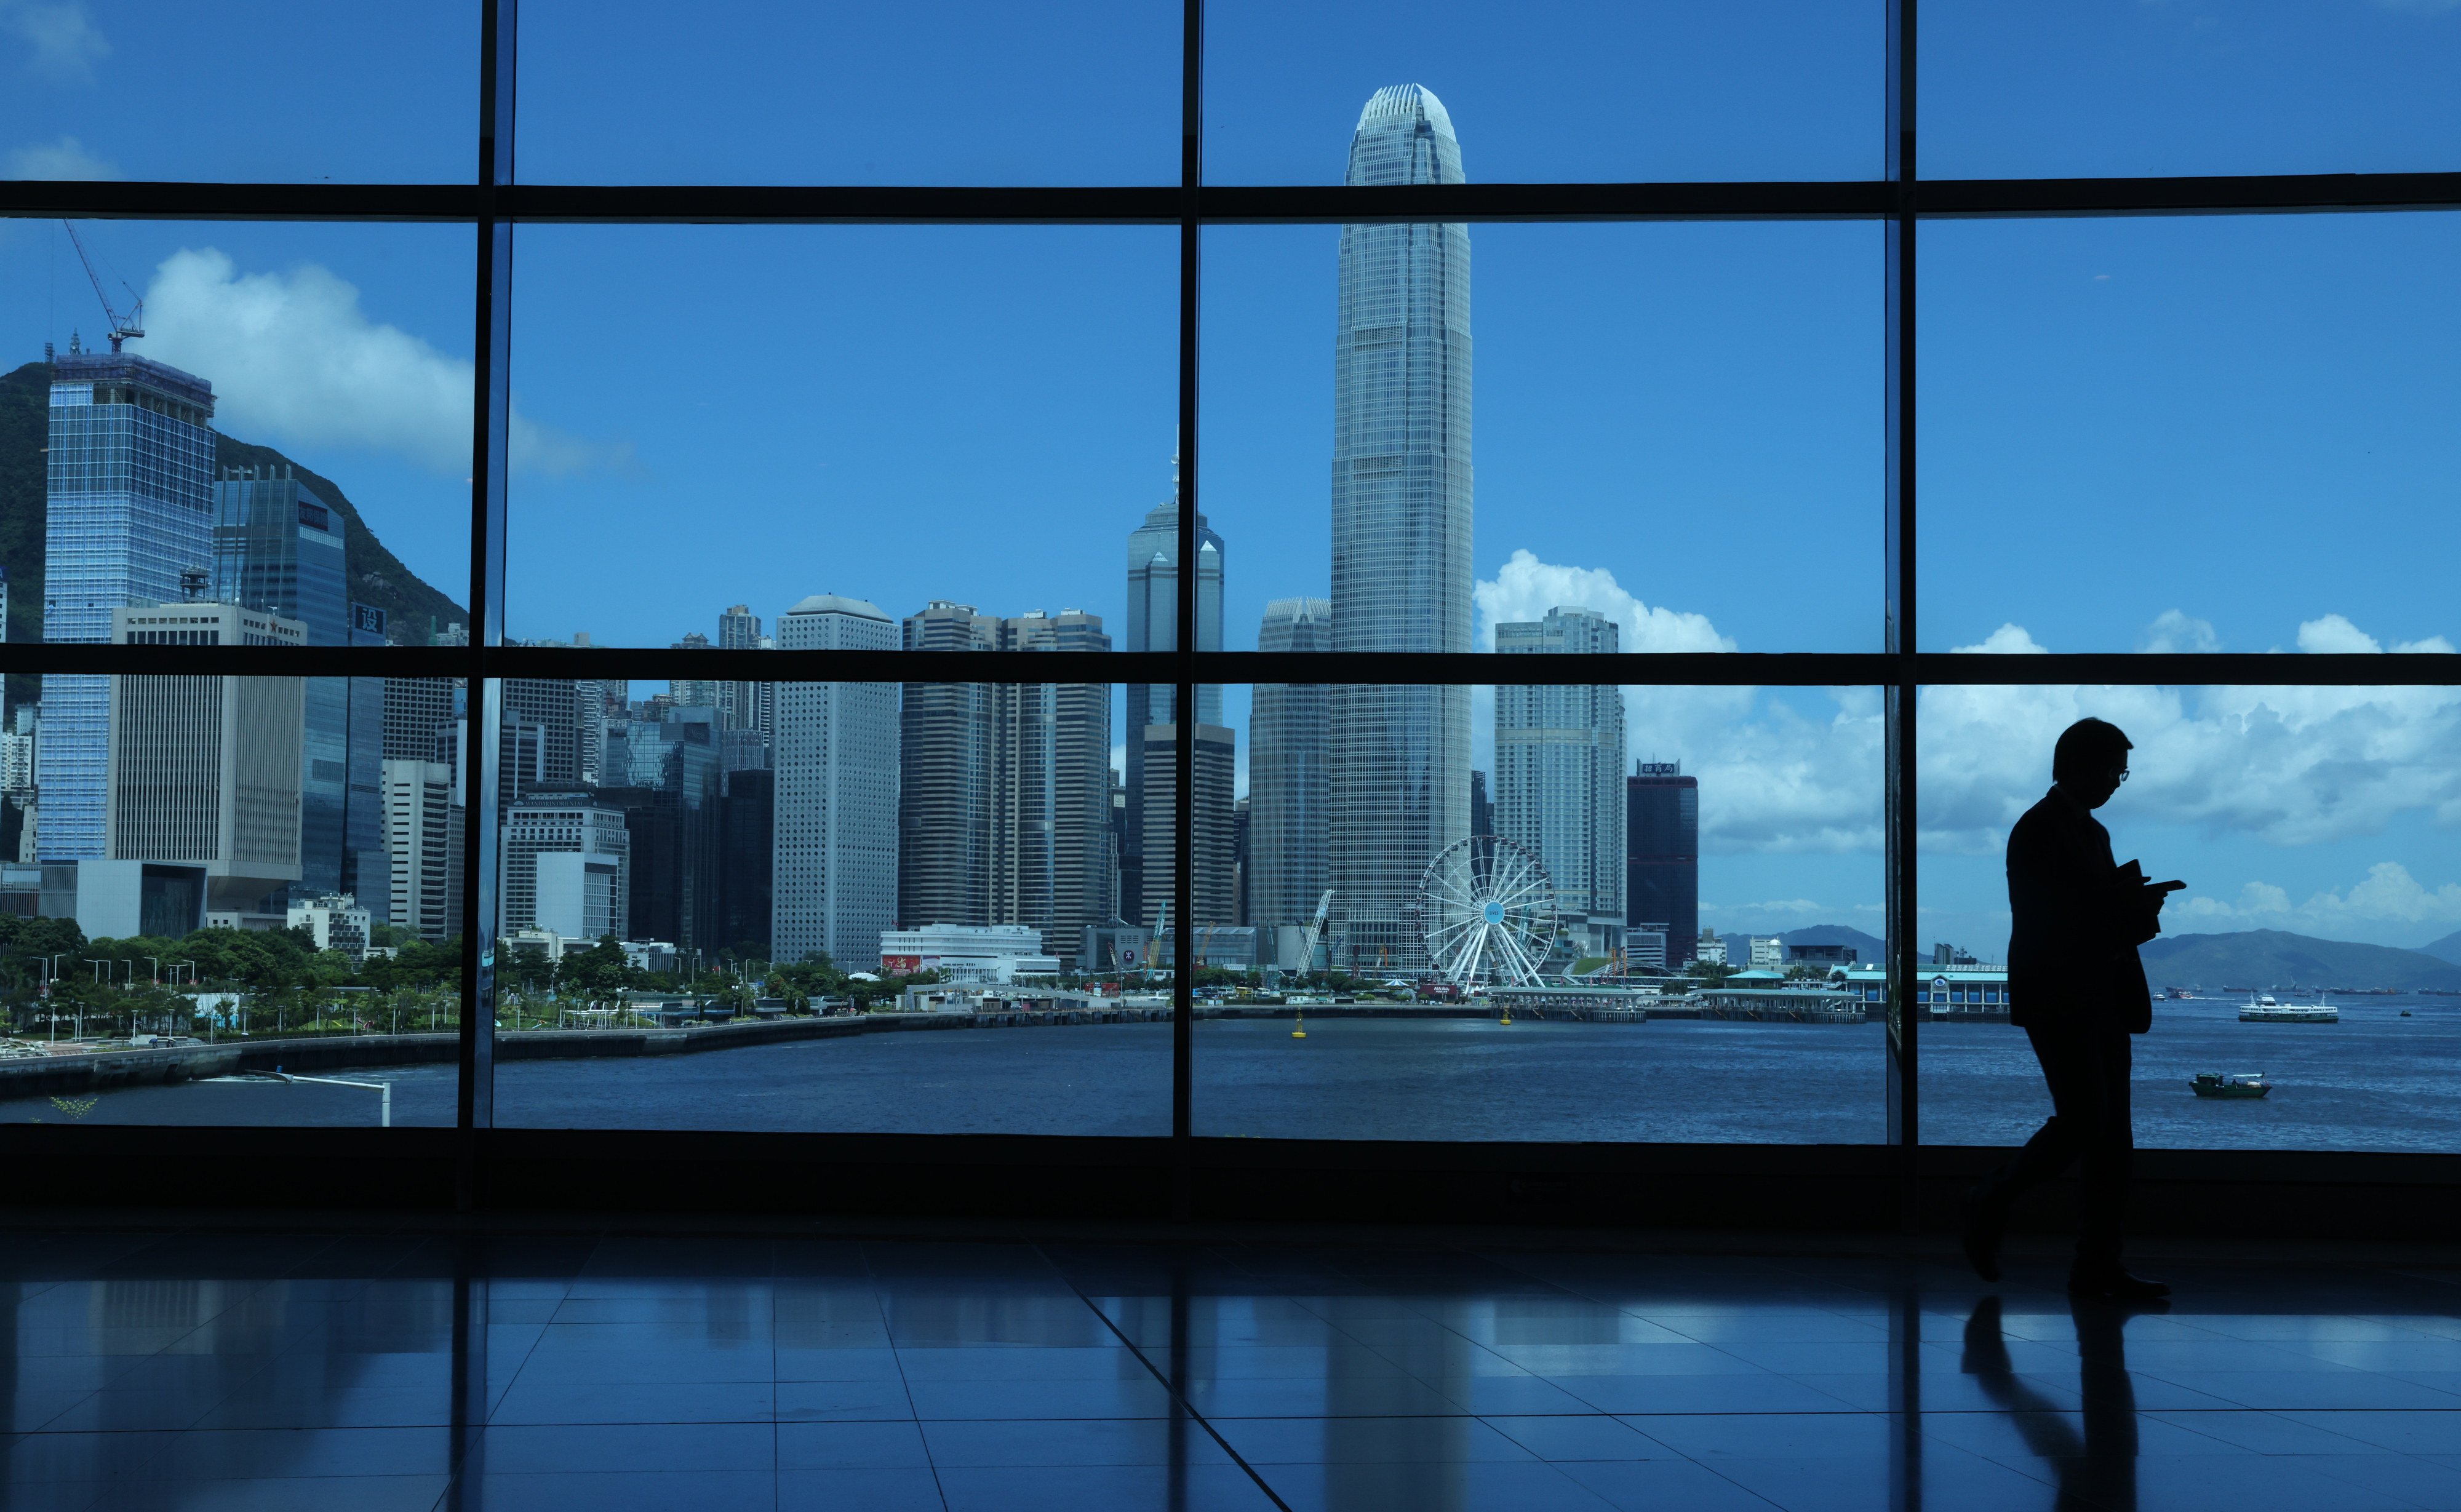 Hong Kong’s financial district as seen from the Hong Kong Convention and Exhibition Centre in Wan Chai. Photo: Yik Yeung-man